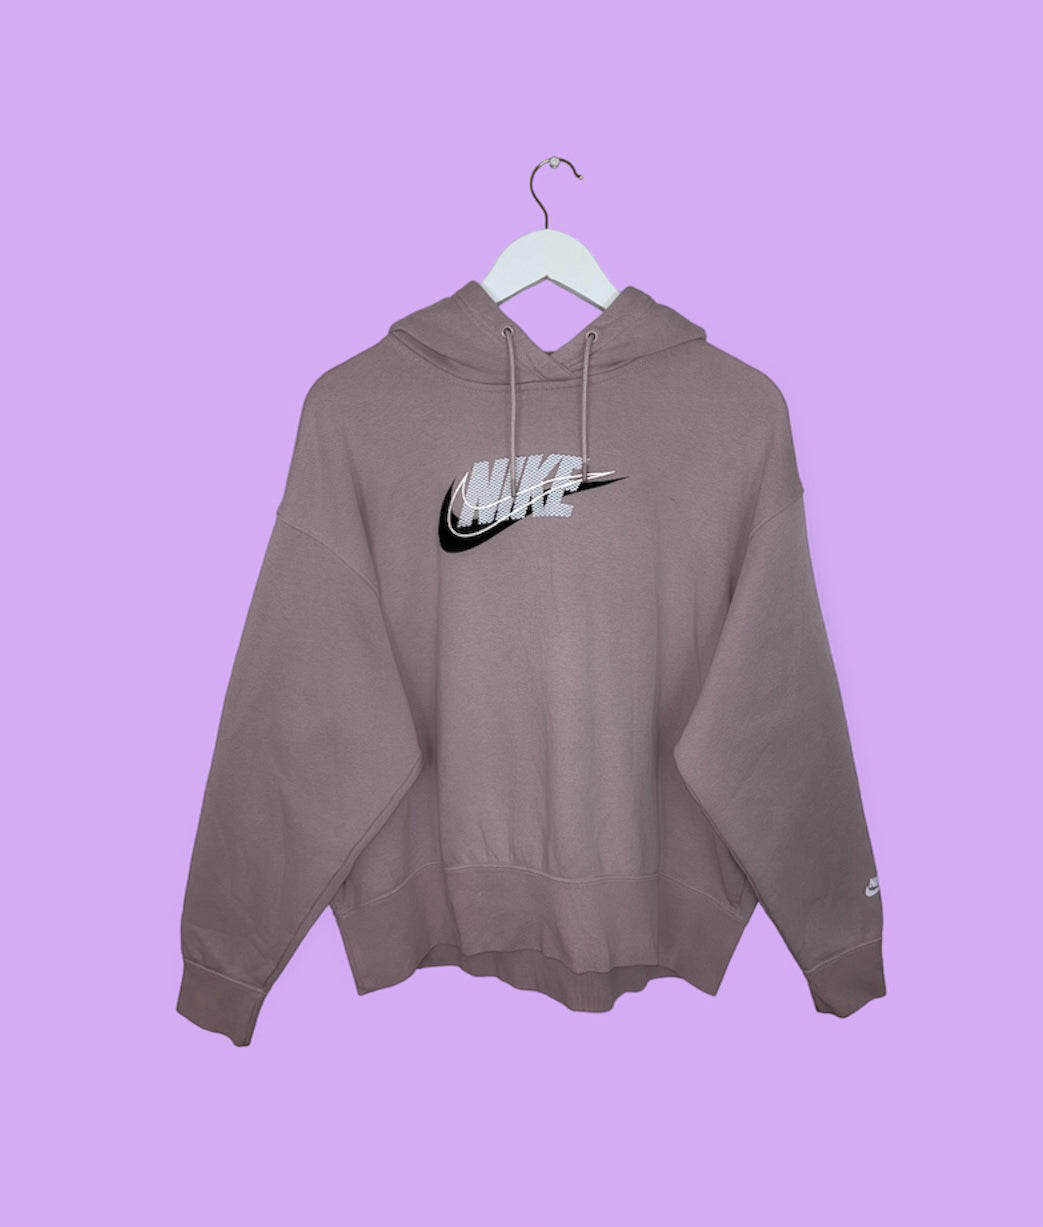 pink hoodie with white and black nike logo shown on a lilac background